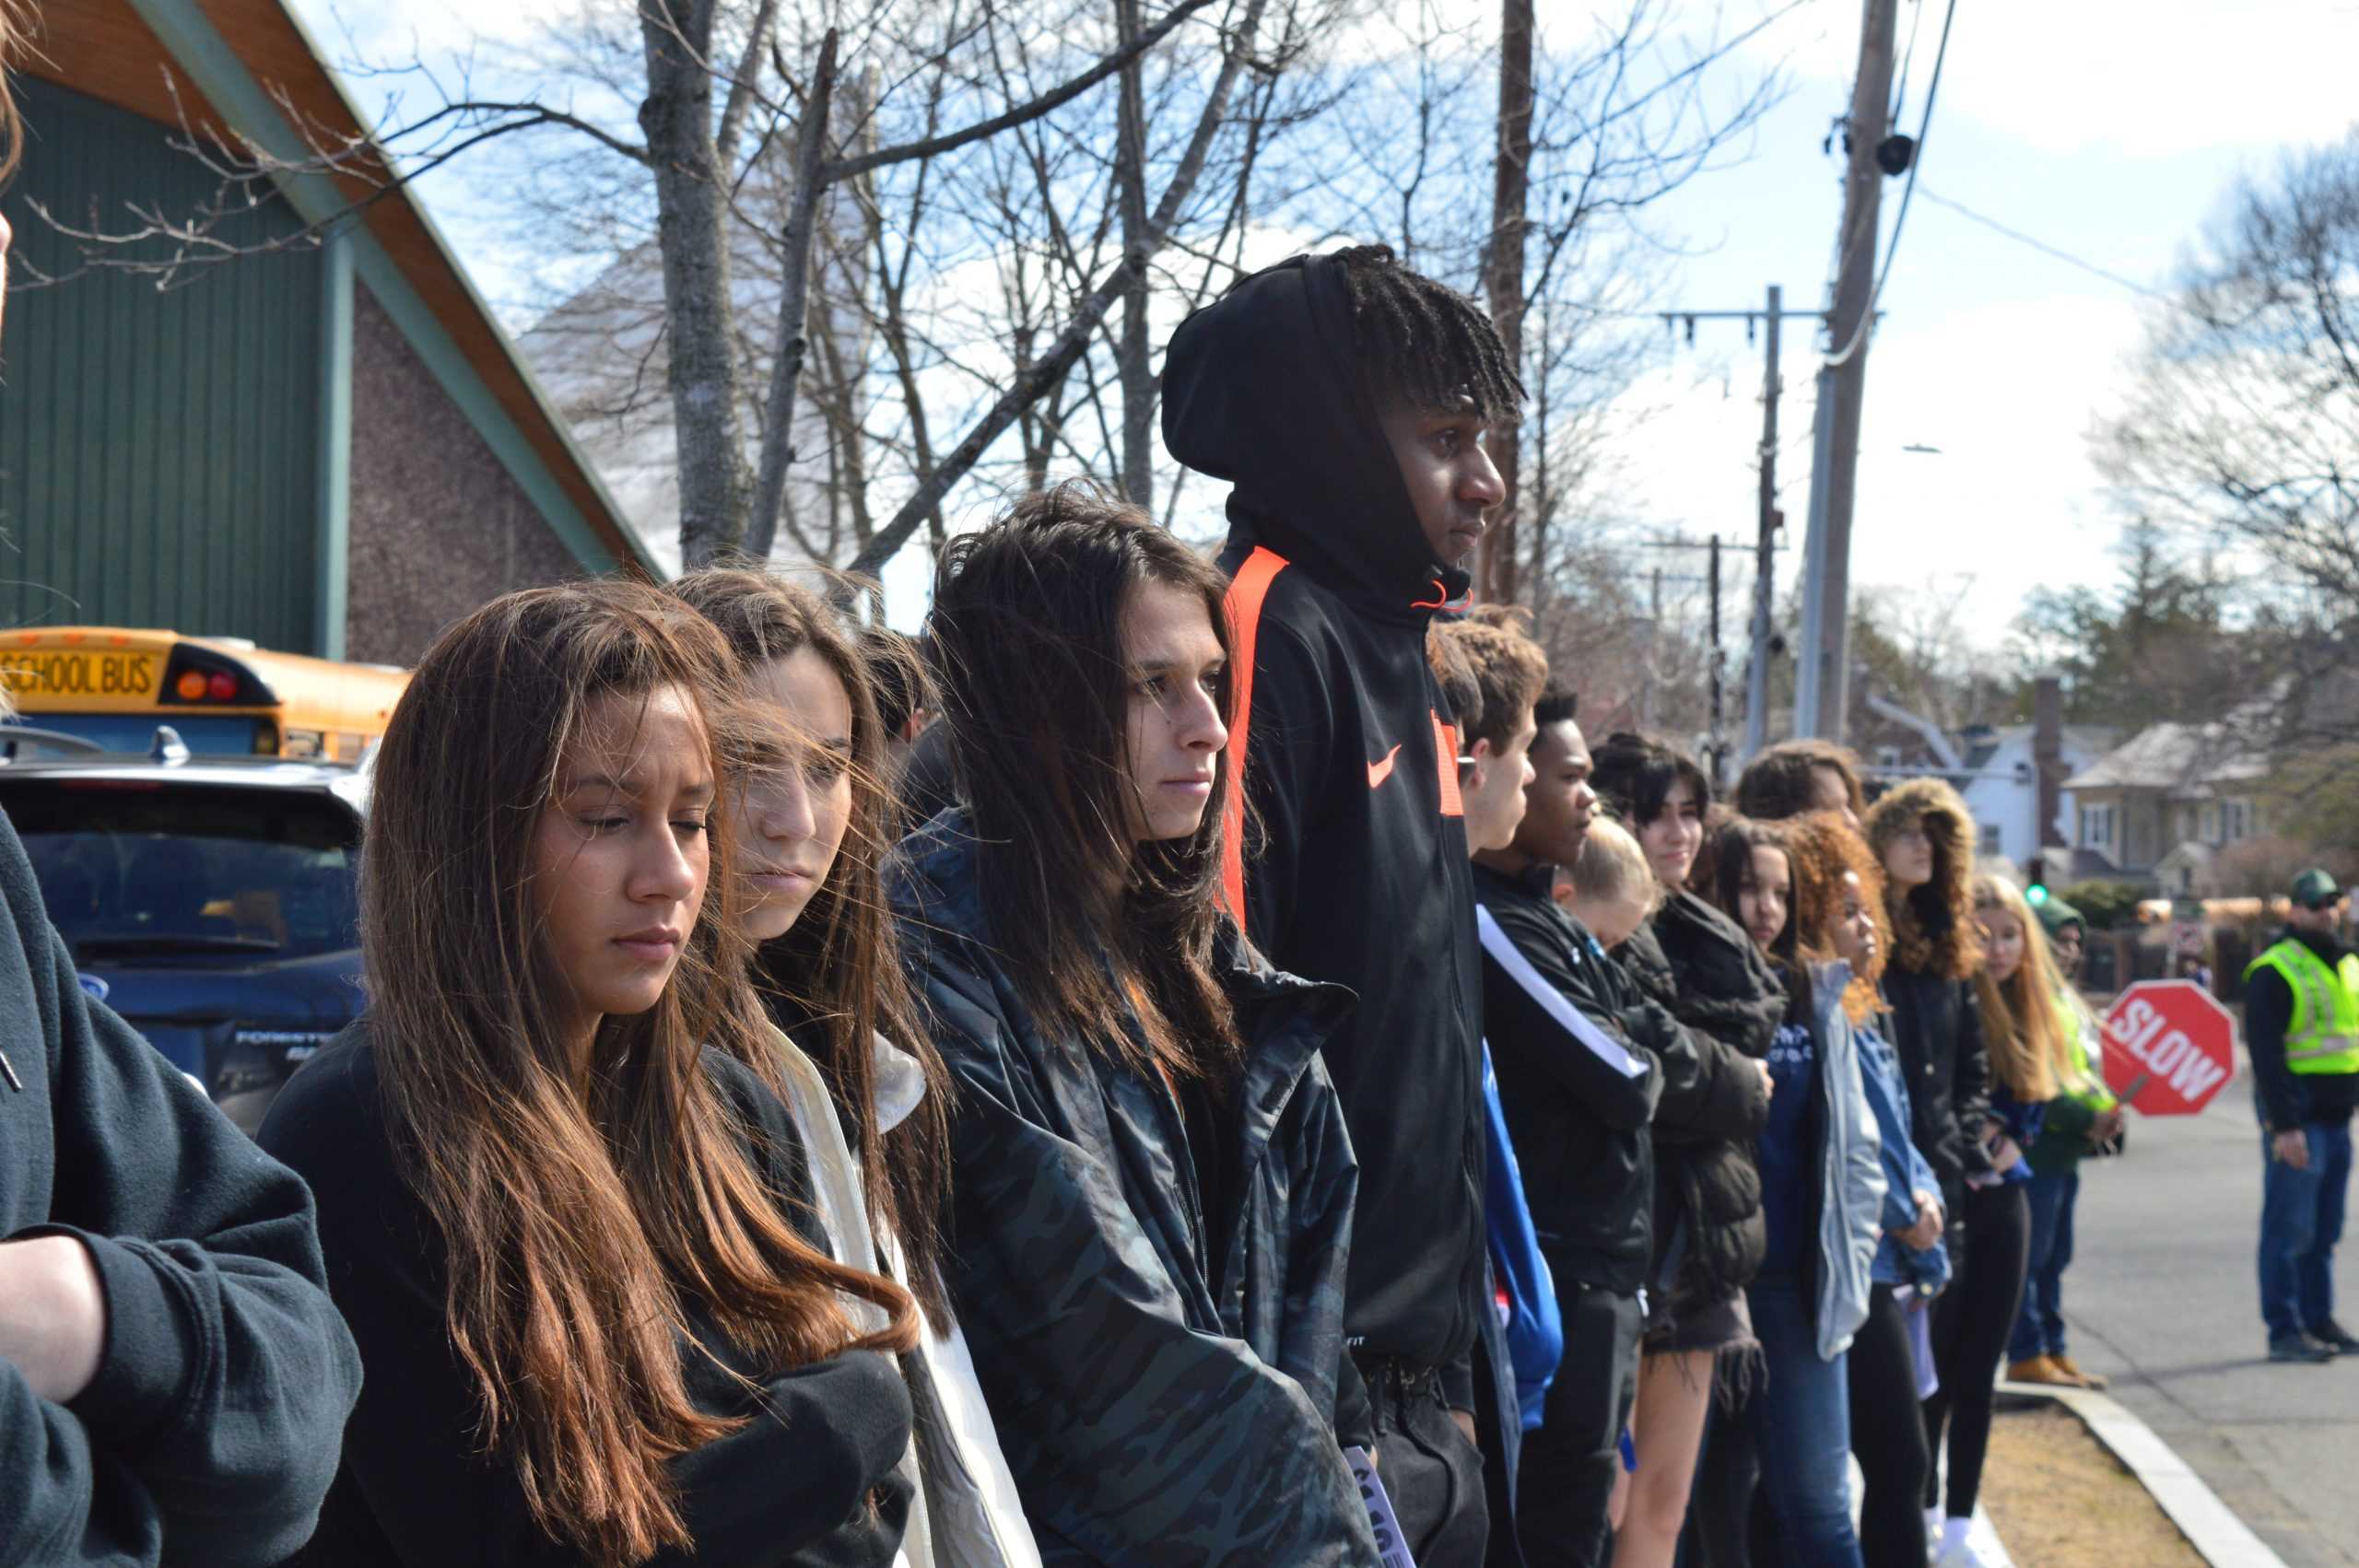 Students+participated+in+a+walk-out+for+radical+compassion.